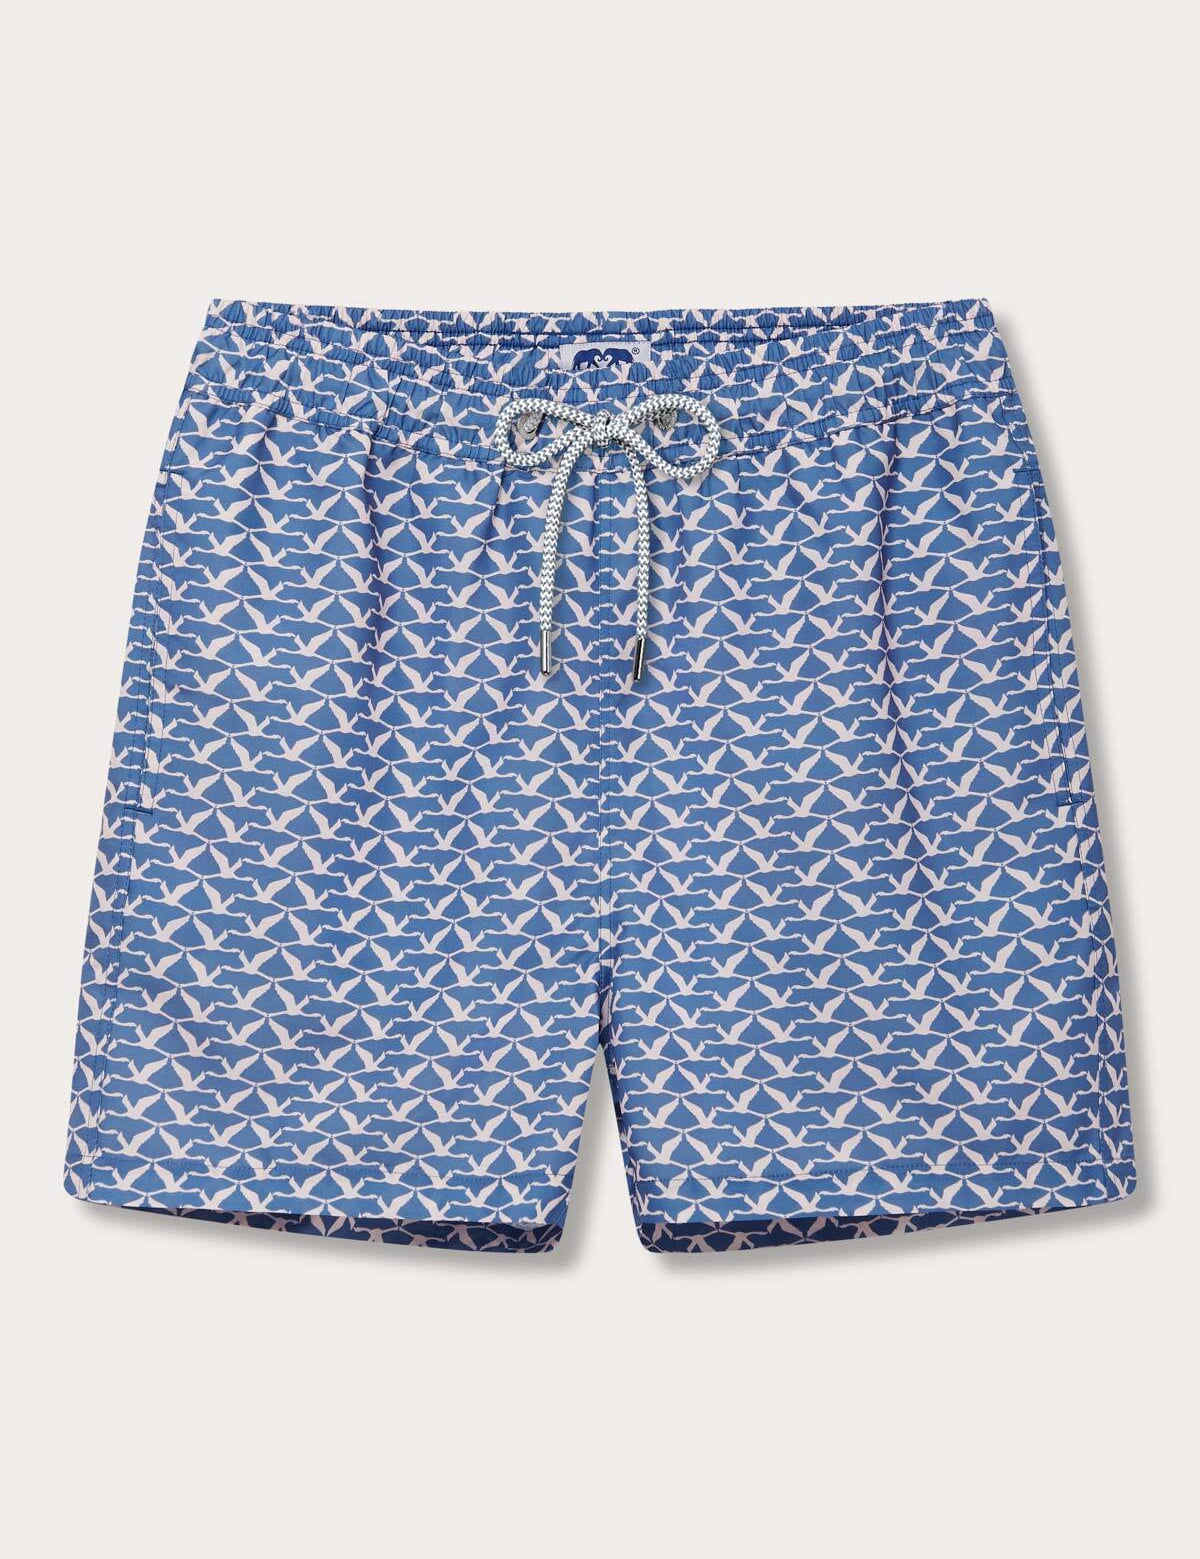 Men's Flamingo Flamboyance Staniel Swim Shorts with blue background and white flamingo print, featuring an elastic waistband with adjustable drawstring.